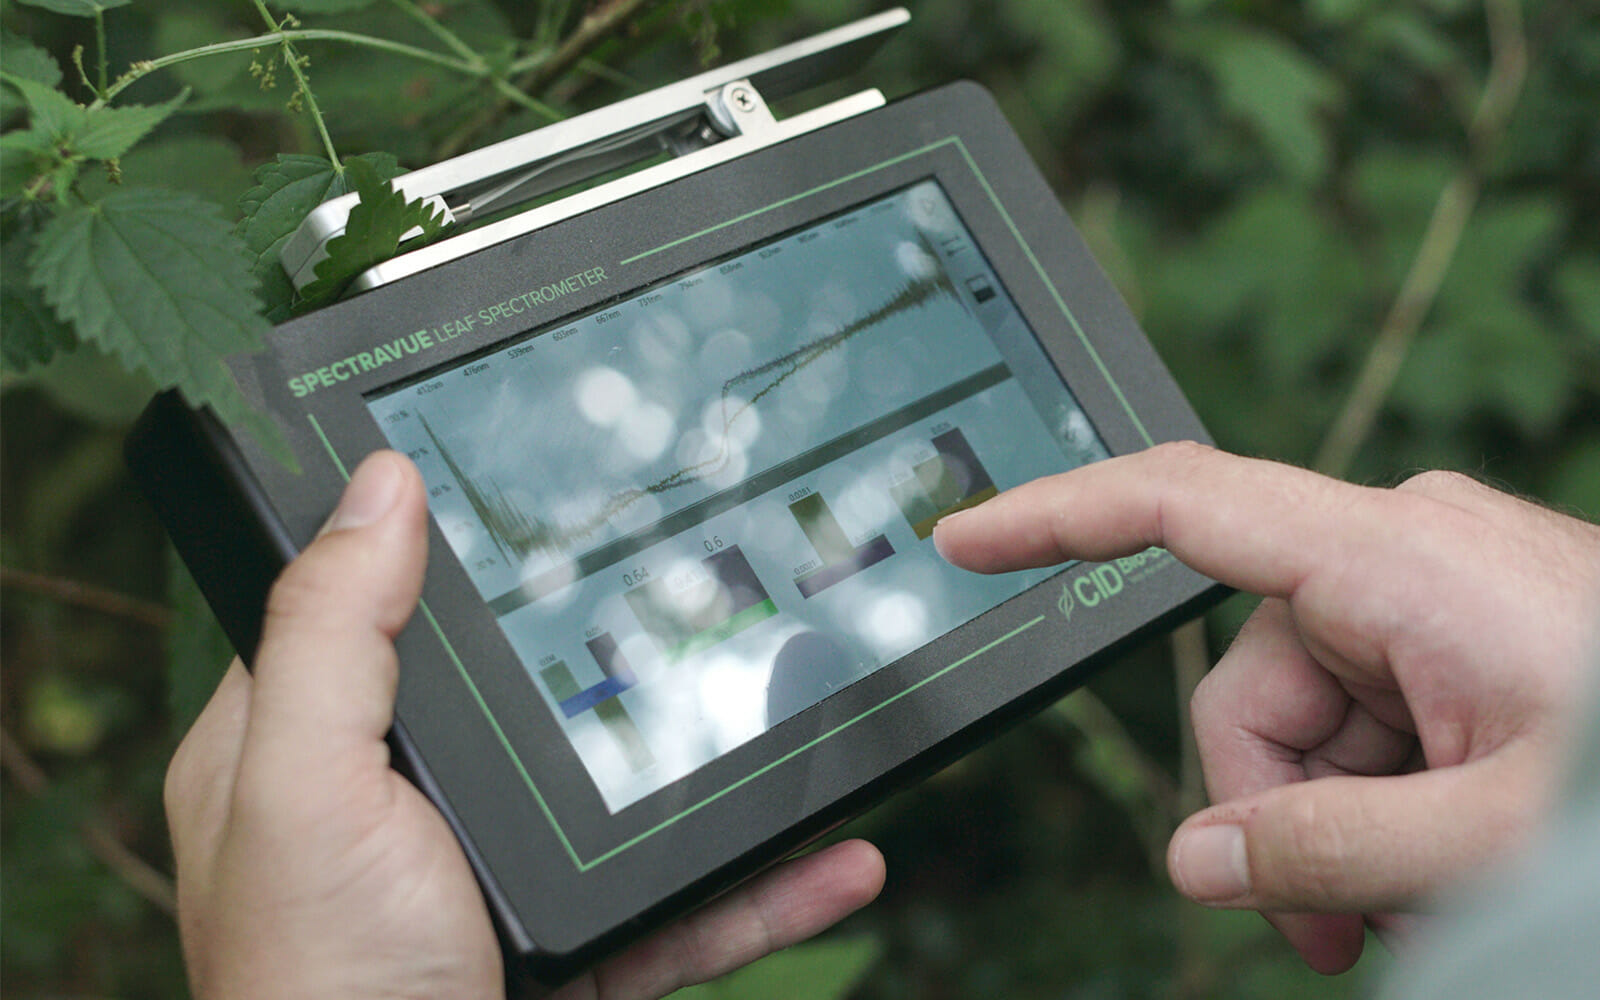 Hands manipulating SpectraVue Leaf Spectrometer touch screen